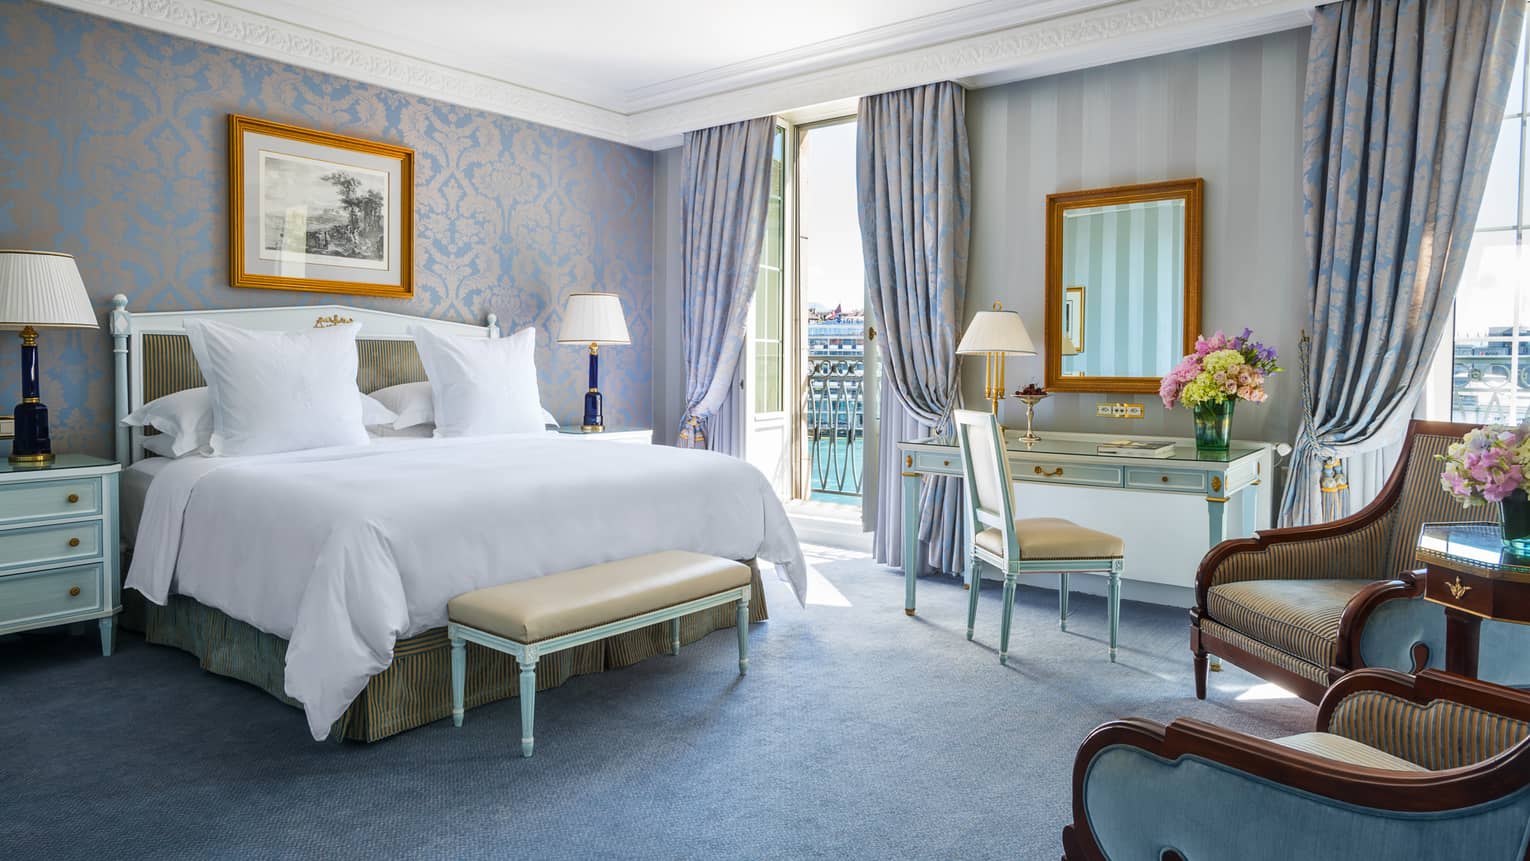 Deluxe Room bed with elegant blue-and-gold wallpaper and decor, floor-to-ceiling French doors opening to patio